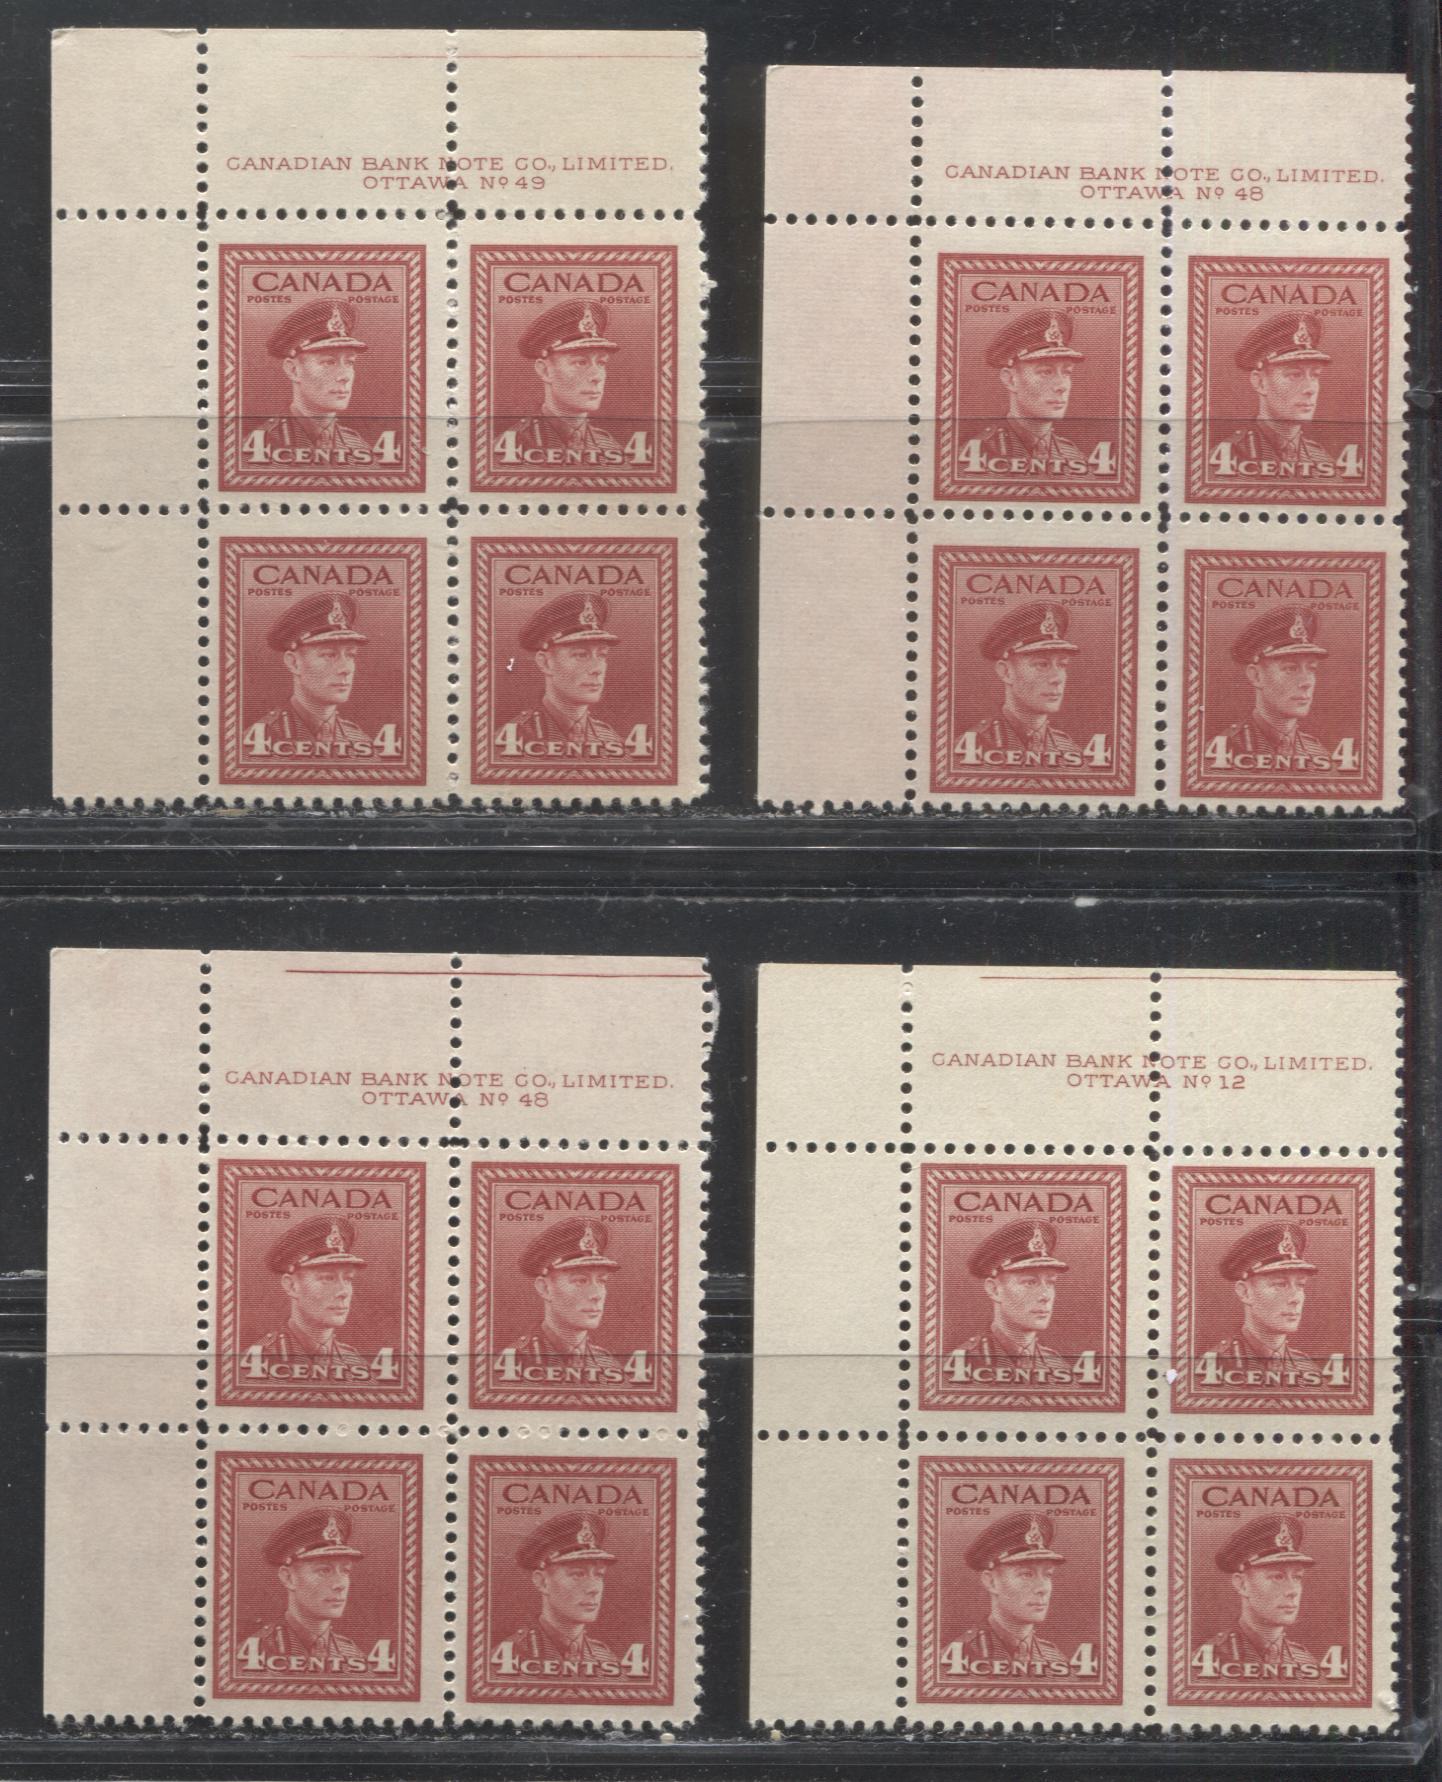 Lot 59 Canada #254 4c Carmine-Red & Deep Carmine Red King George VI  1942-1949 War Issue, Fine OG Plate 12, 48 & 49 Upper Left Blocks of 4 Showing Broken "C" in "Canada" on Plate 12